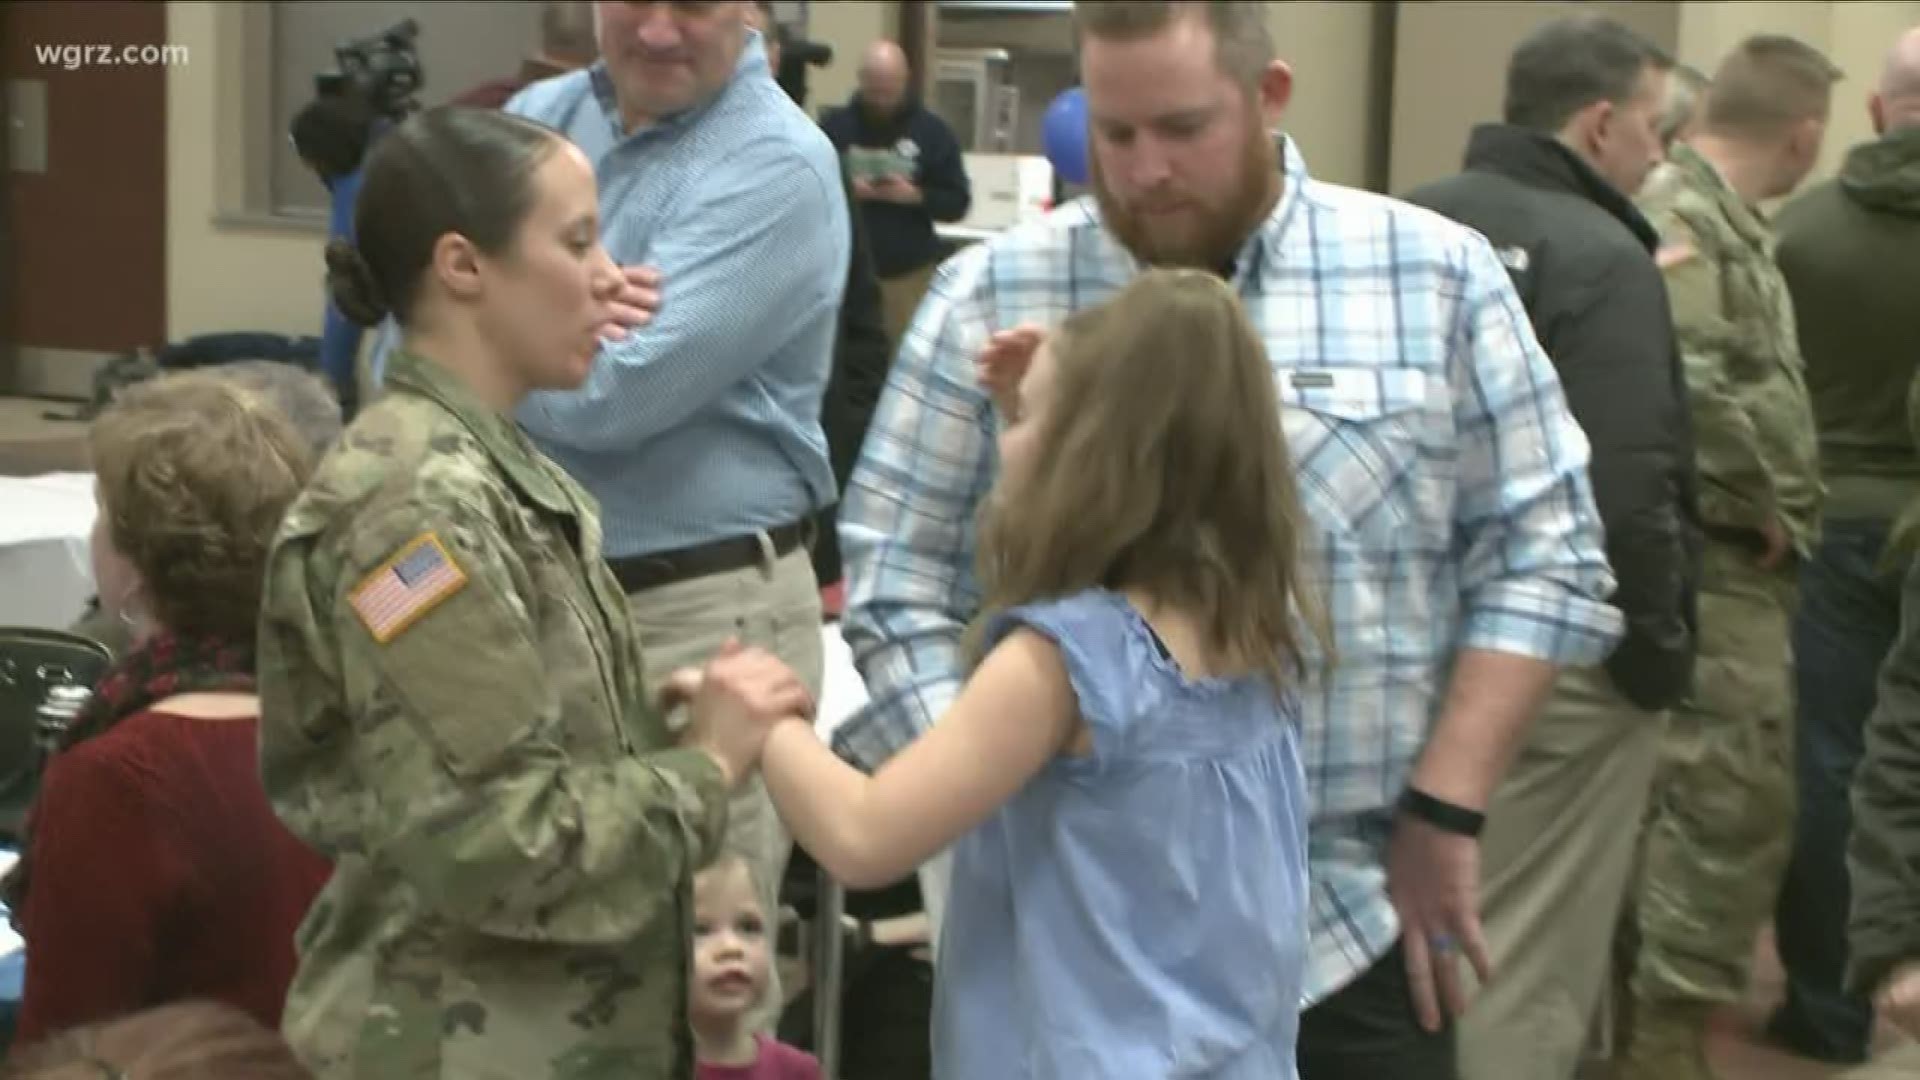 they headed off to Afghanistan to potentially save the lives of injured troops.